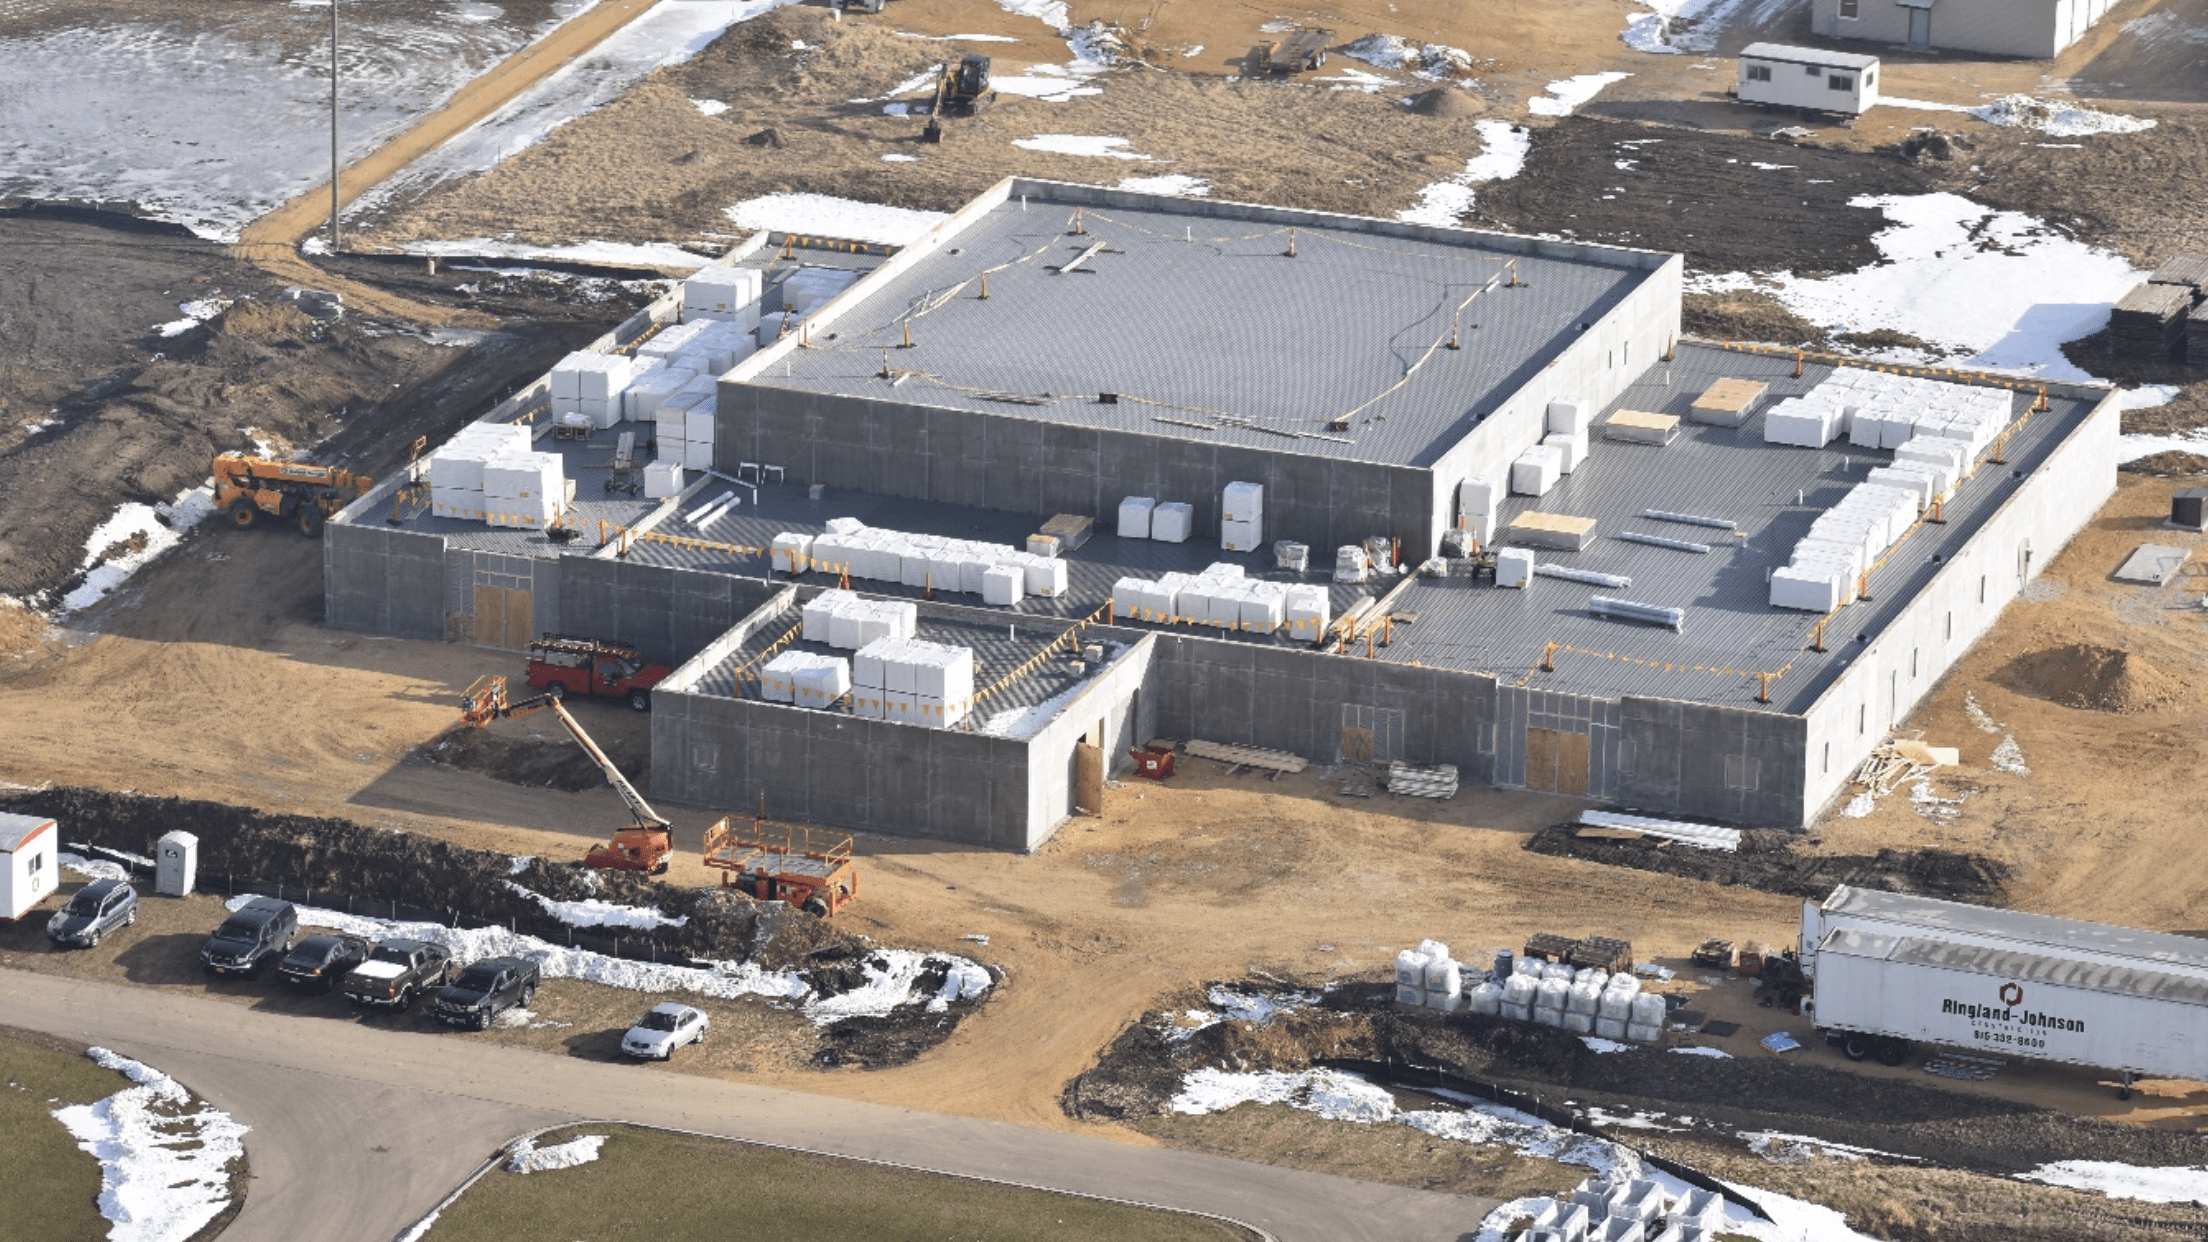 New Lee County Jail Construction Ahead of Schedule | WALS